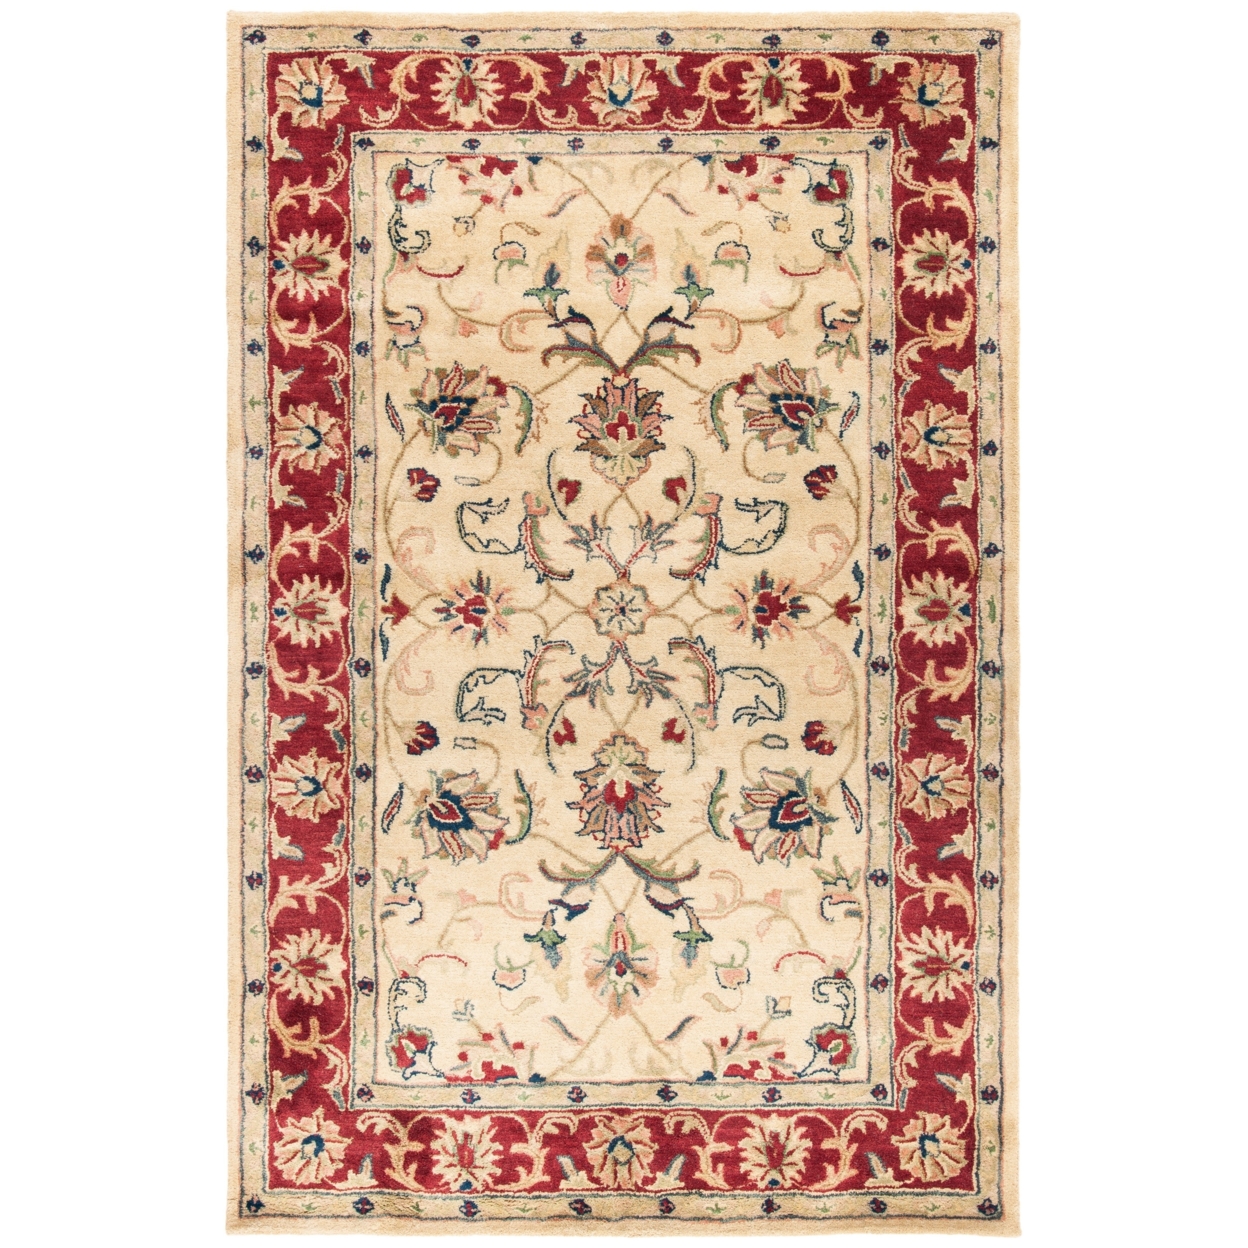 SAFAVIEH CL398A Classic Gold / Red - 2'-3 X 10' Runner